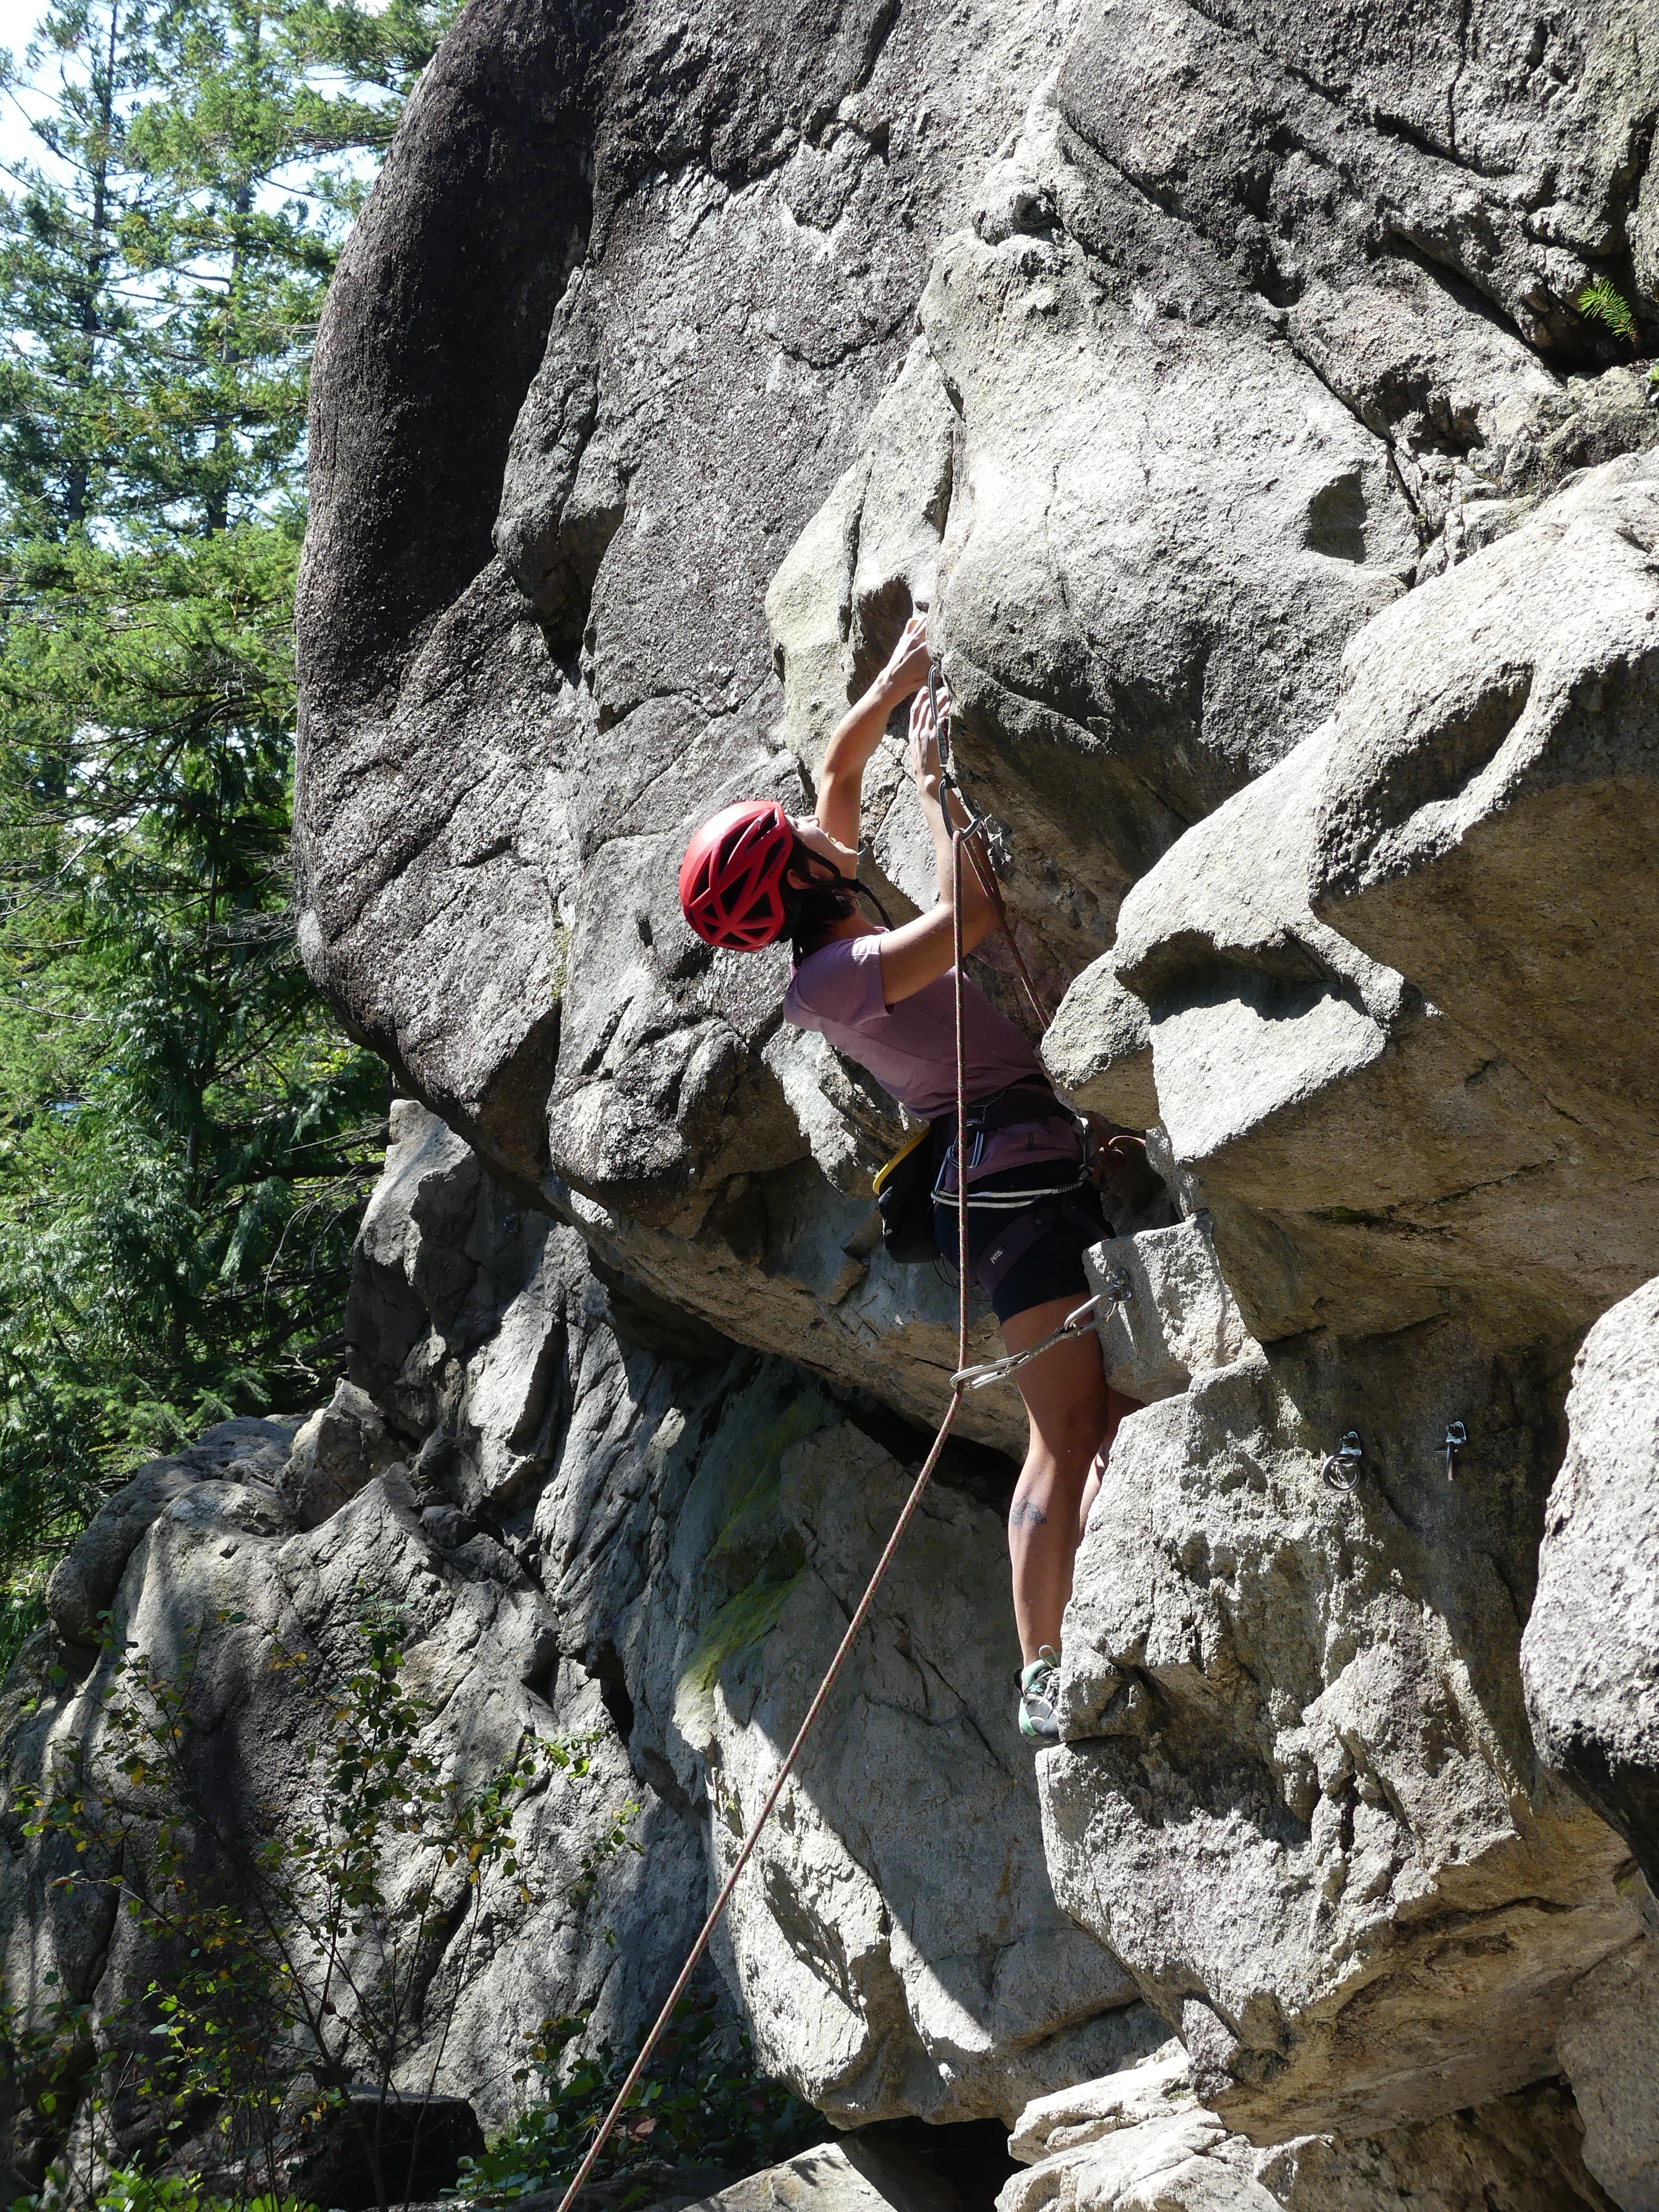 Alex on Double Overhang (grade 5.8) on the Woodstock wall at Murrin Park, Squamish.